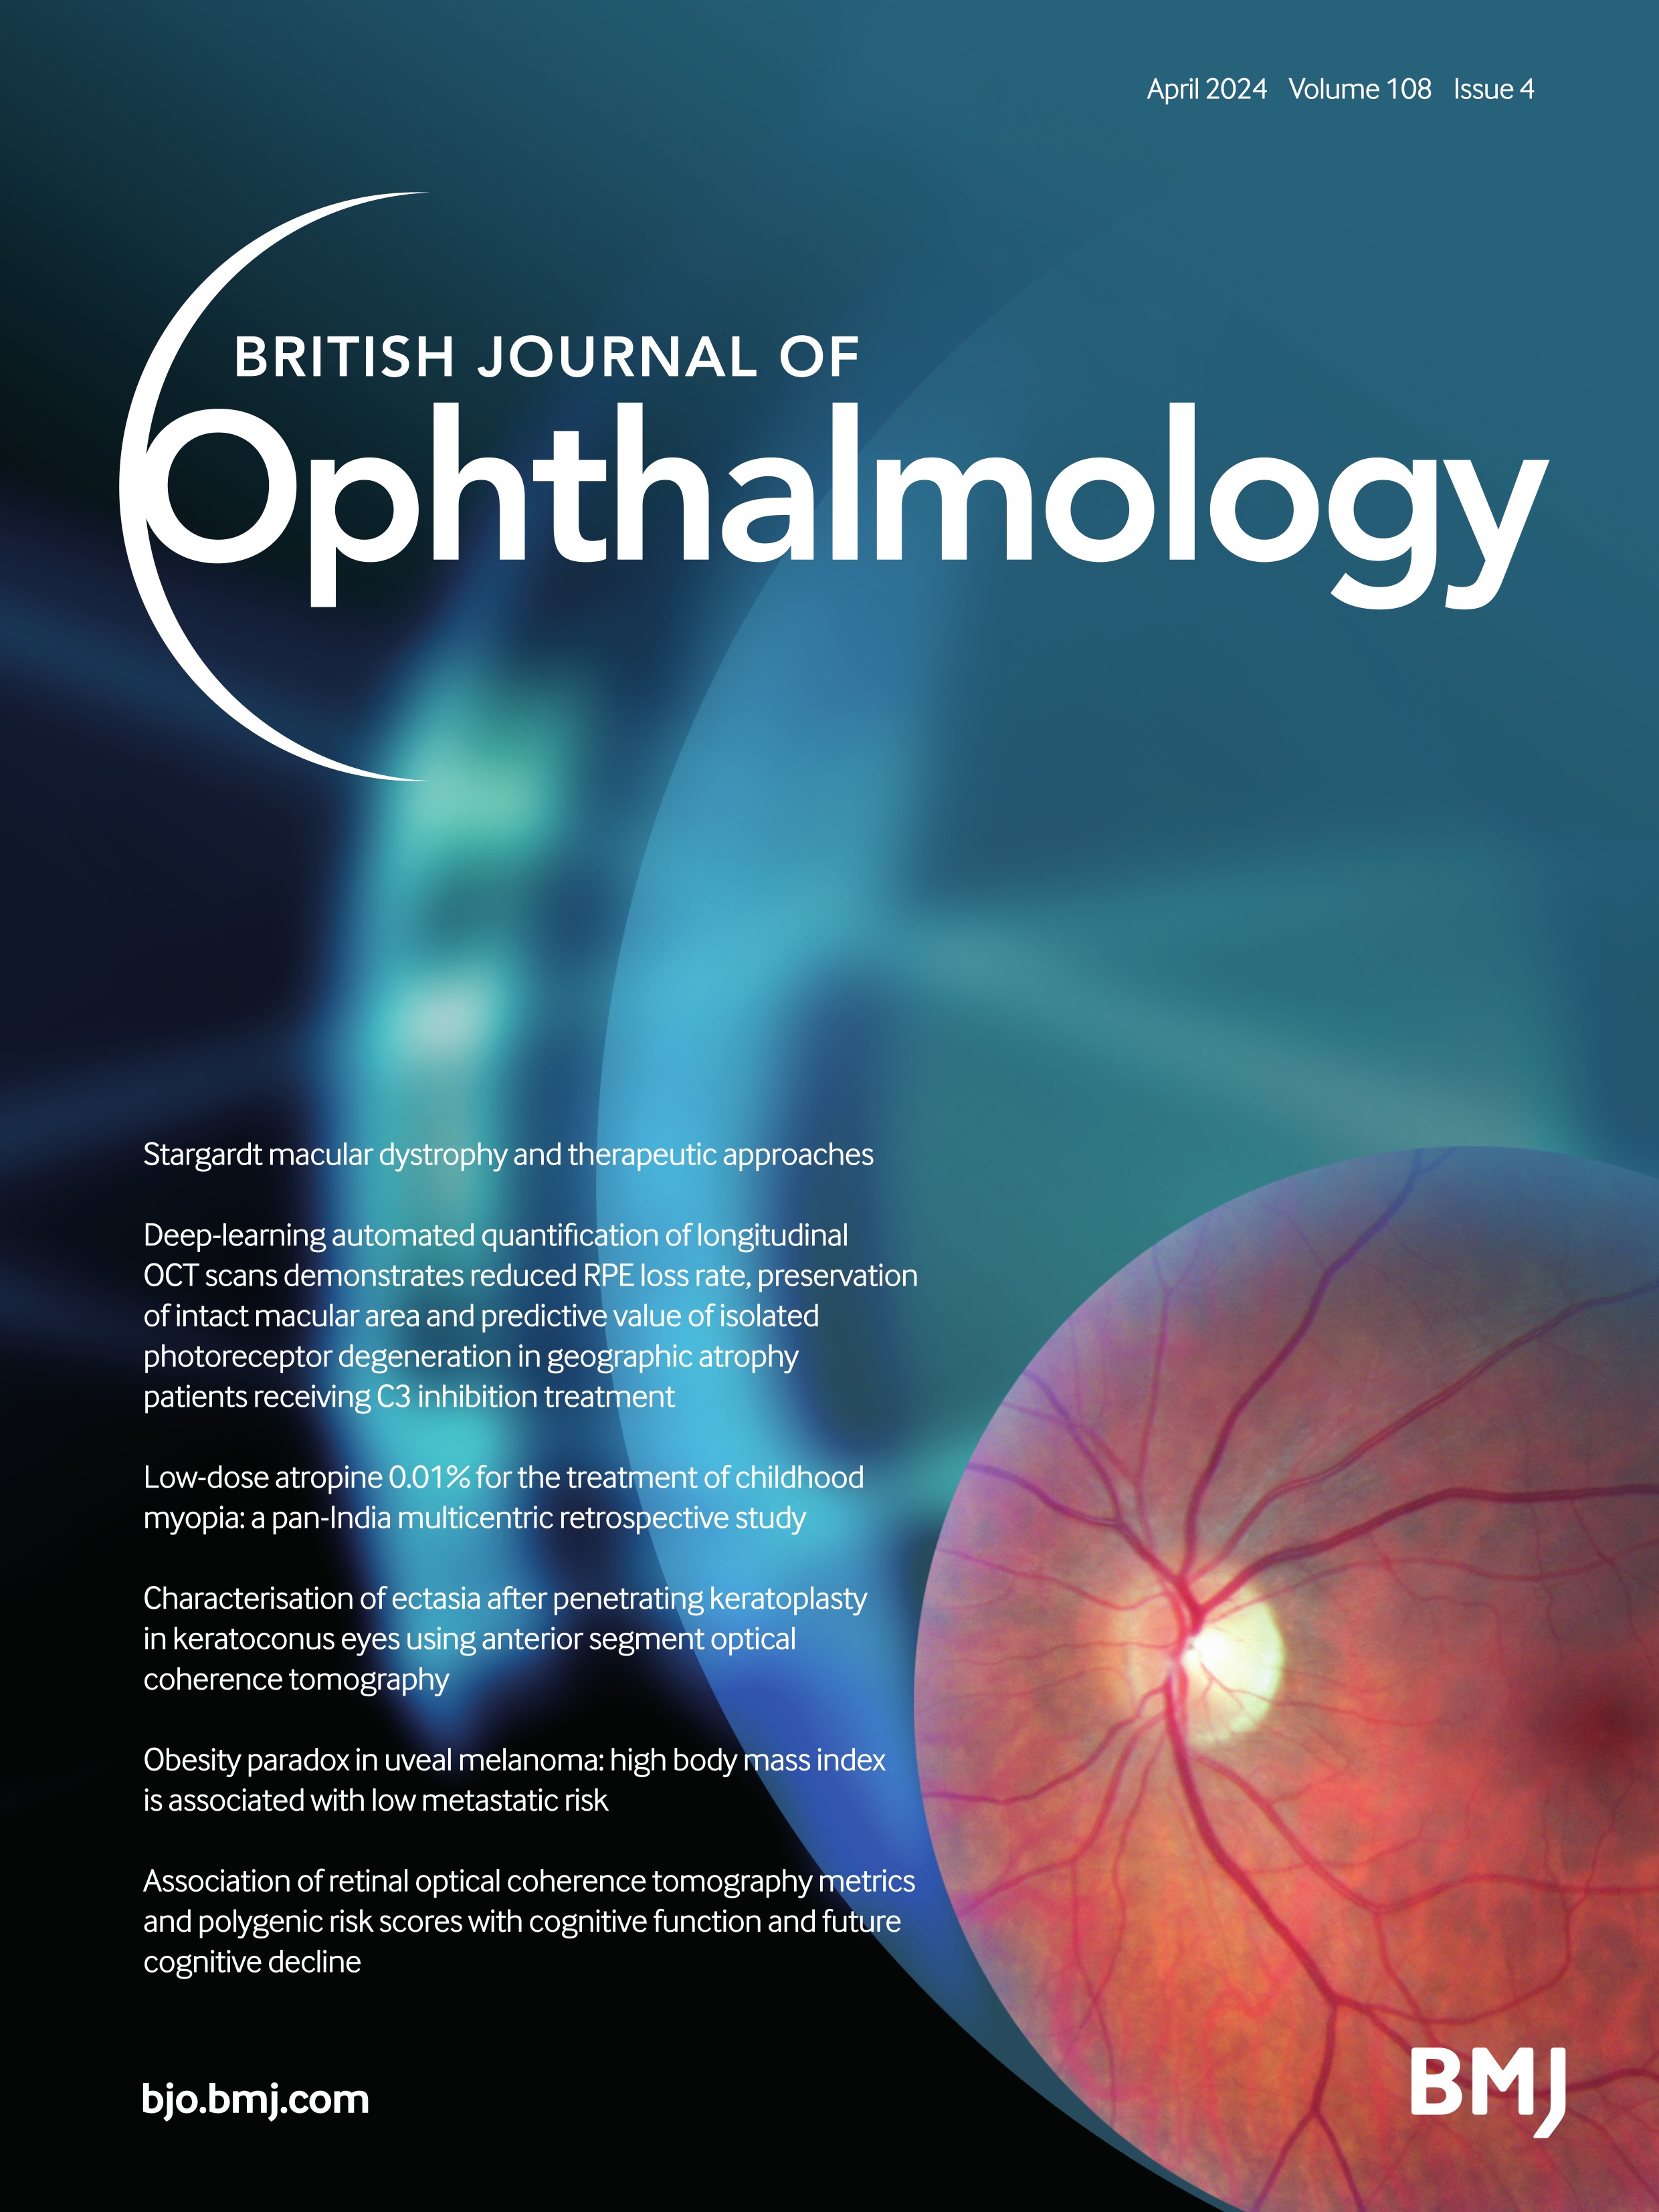 Association of retinal optical coherence tomography metrics and polygenic risk scores with cognitive function and future cognitive decline